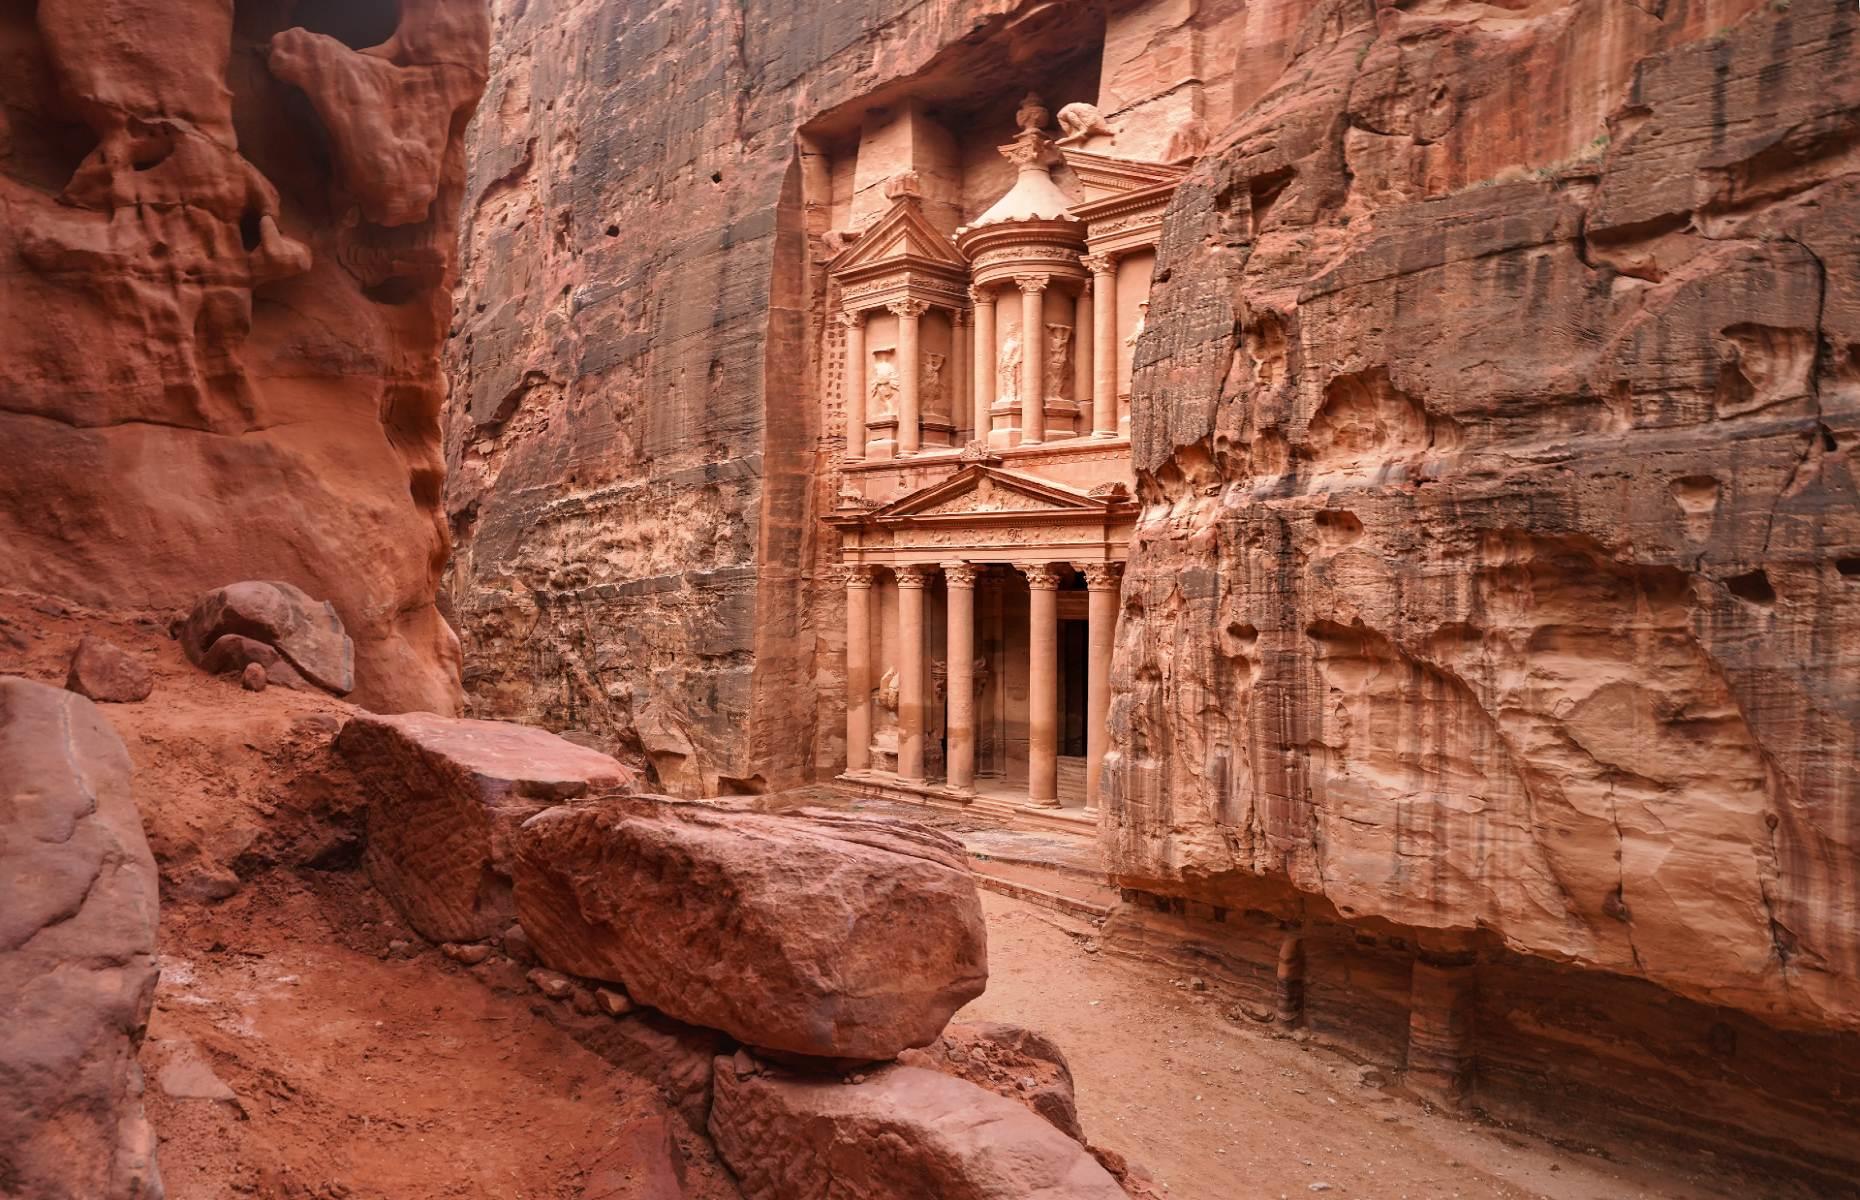 <p>Hidden among the rugged desert landscapes of southwestern Jordan, Petra is an ancient city that was carved into the rock more than 2,000 years ago by the Nabataeans (a nomadic tribe who eventually settled) and it became the capital of their prosperous empire. The most famous structure is the Treasury (pictured), a 131-foot-high (40m) monument complete with columns and intricate carvings, whose exact function is still unknown to experts. Petra Archaeological Park is roughly a three-hour drive from the capital, Amman, and two hours from Wadi Rum.</p>